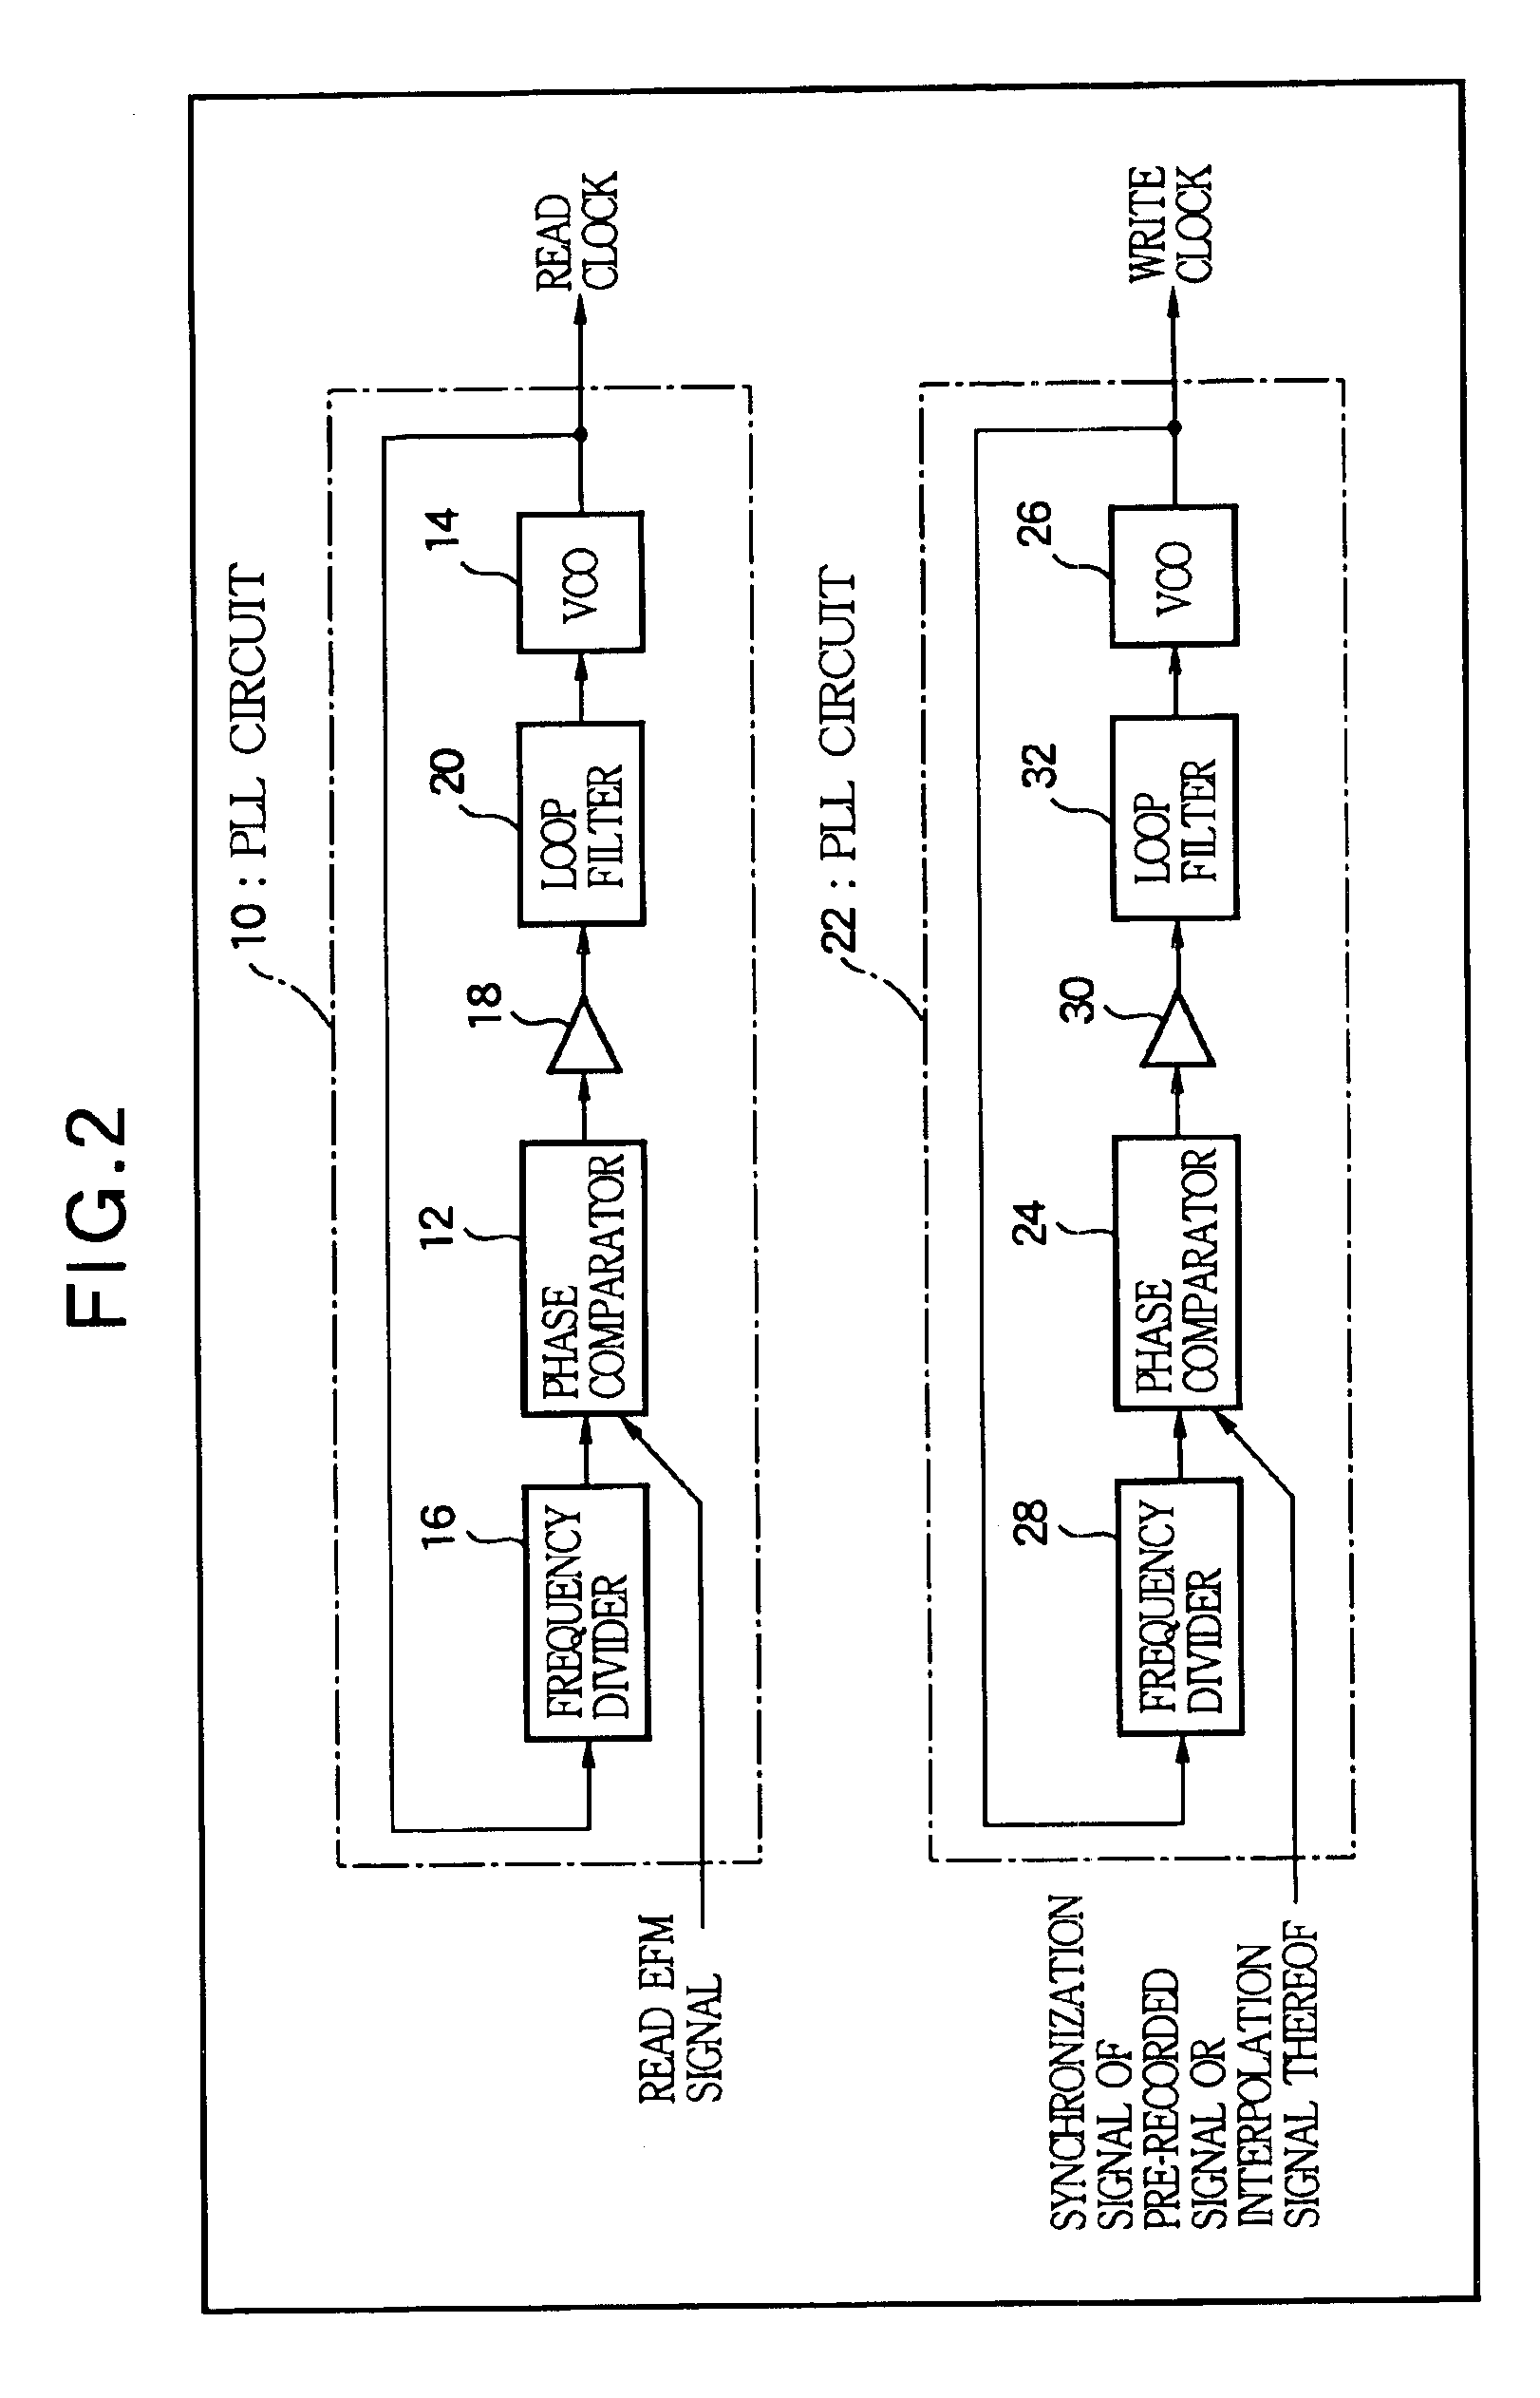 Method of consecutive writing on recordable disc